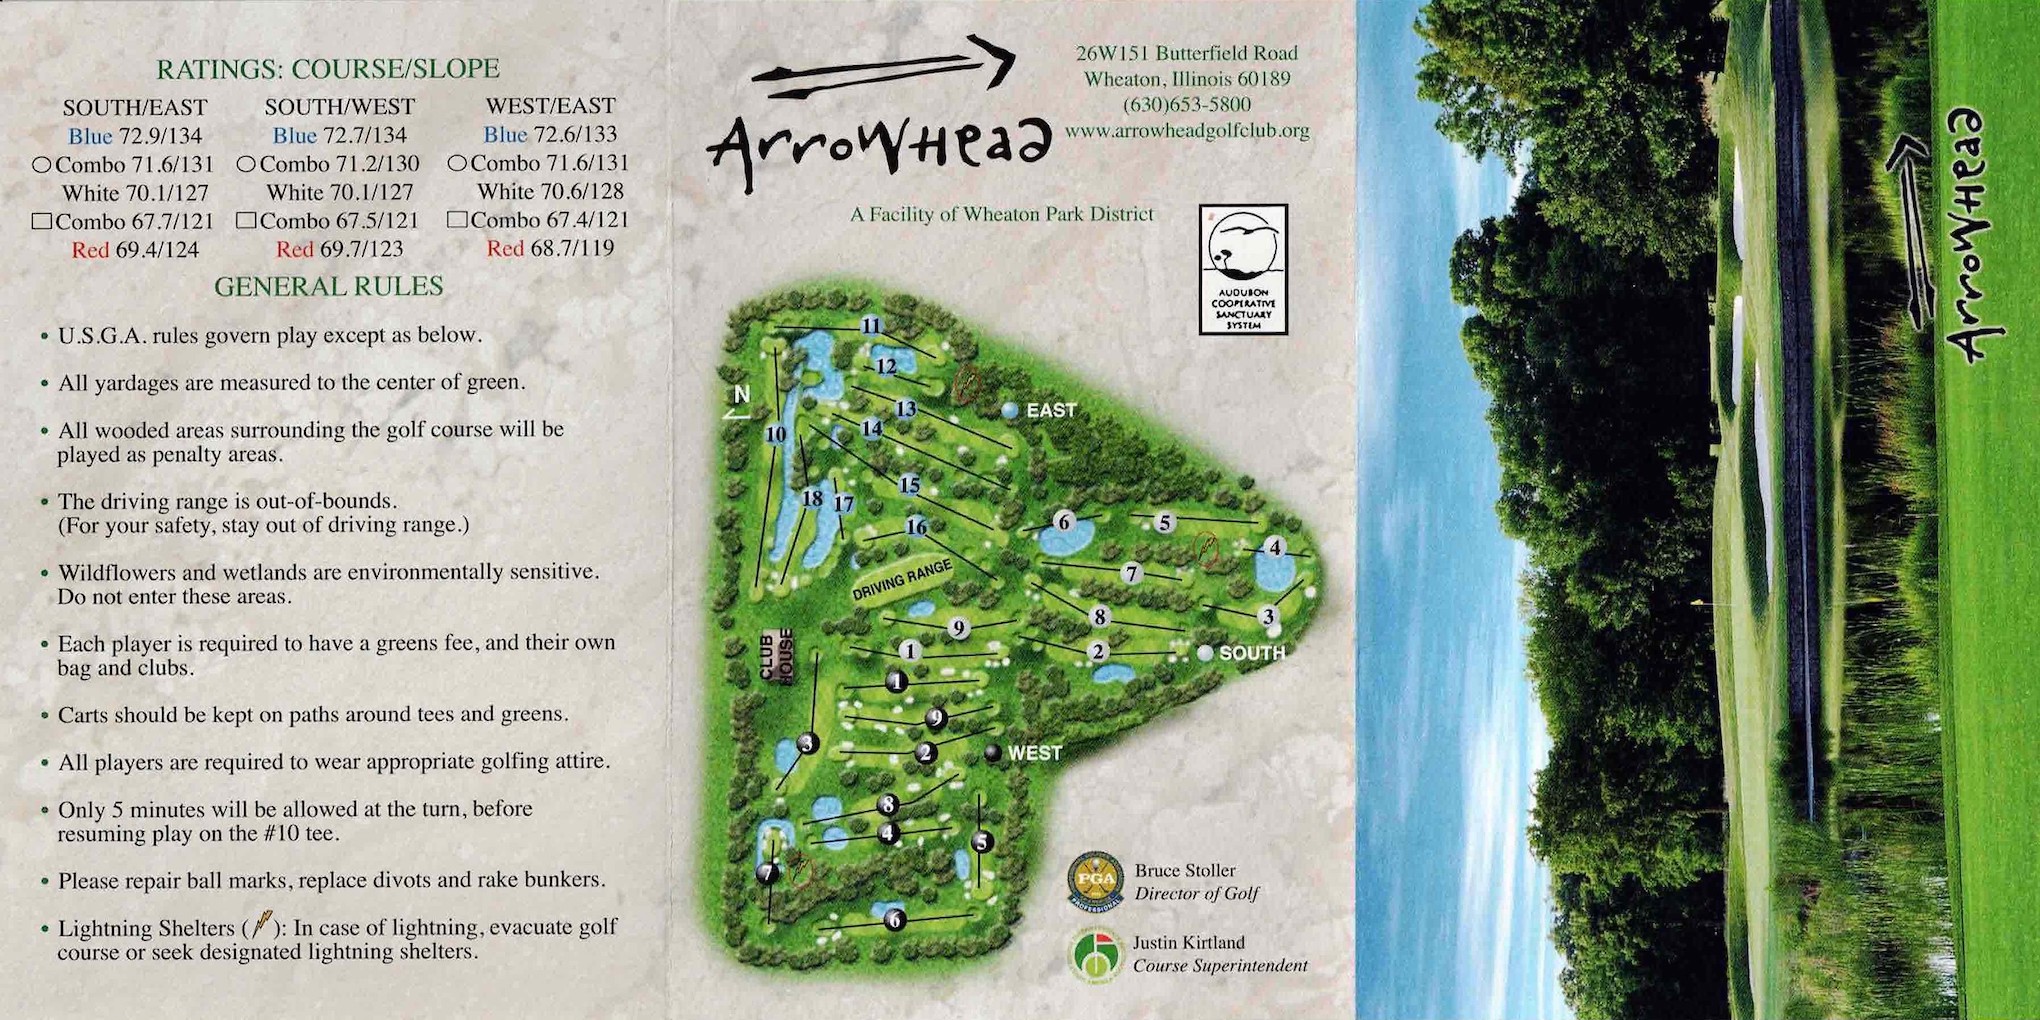 Scan of the scorecard from Arrowhead West Course in Wheaton, Illinois. 